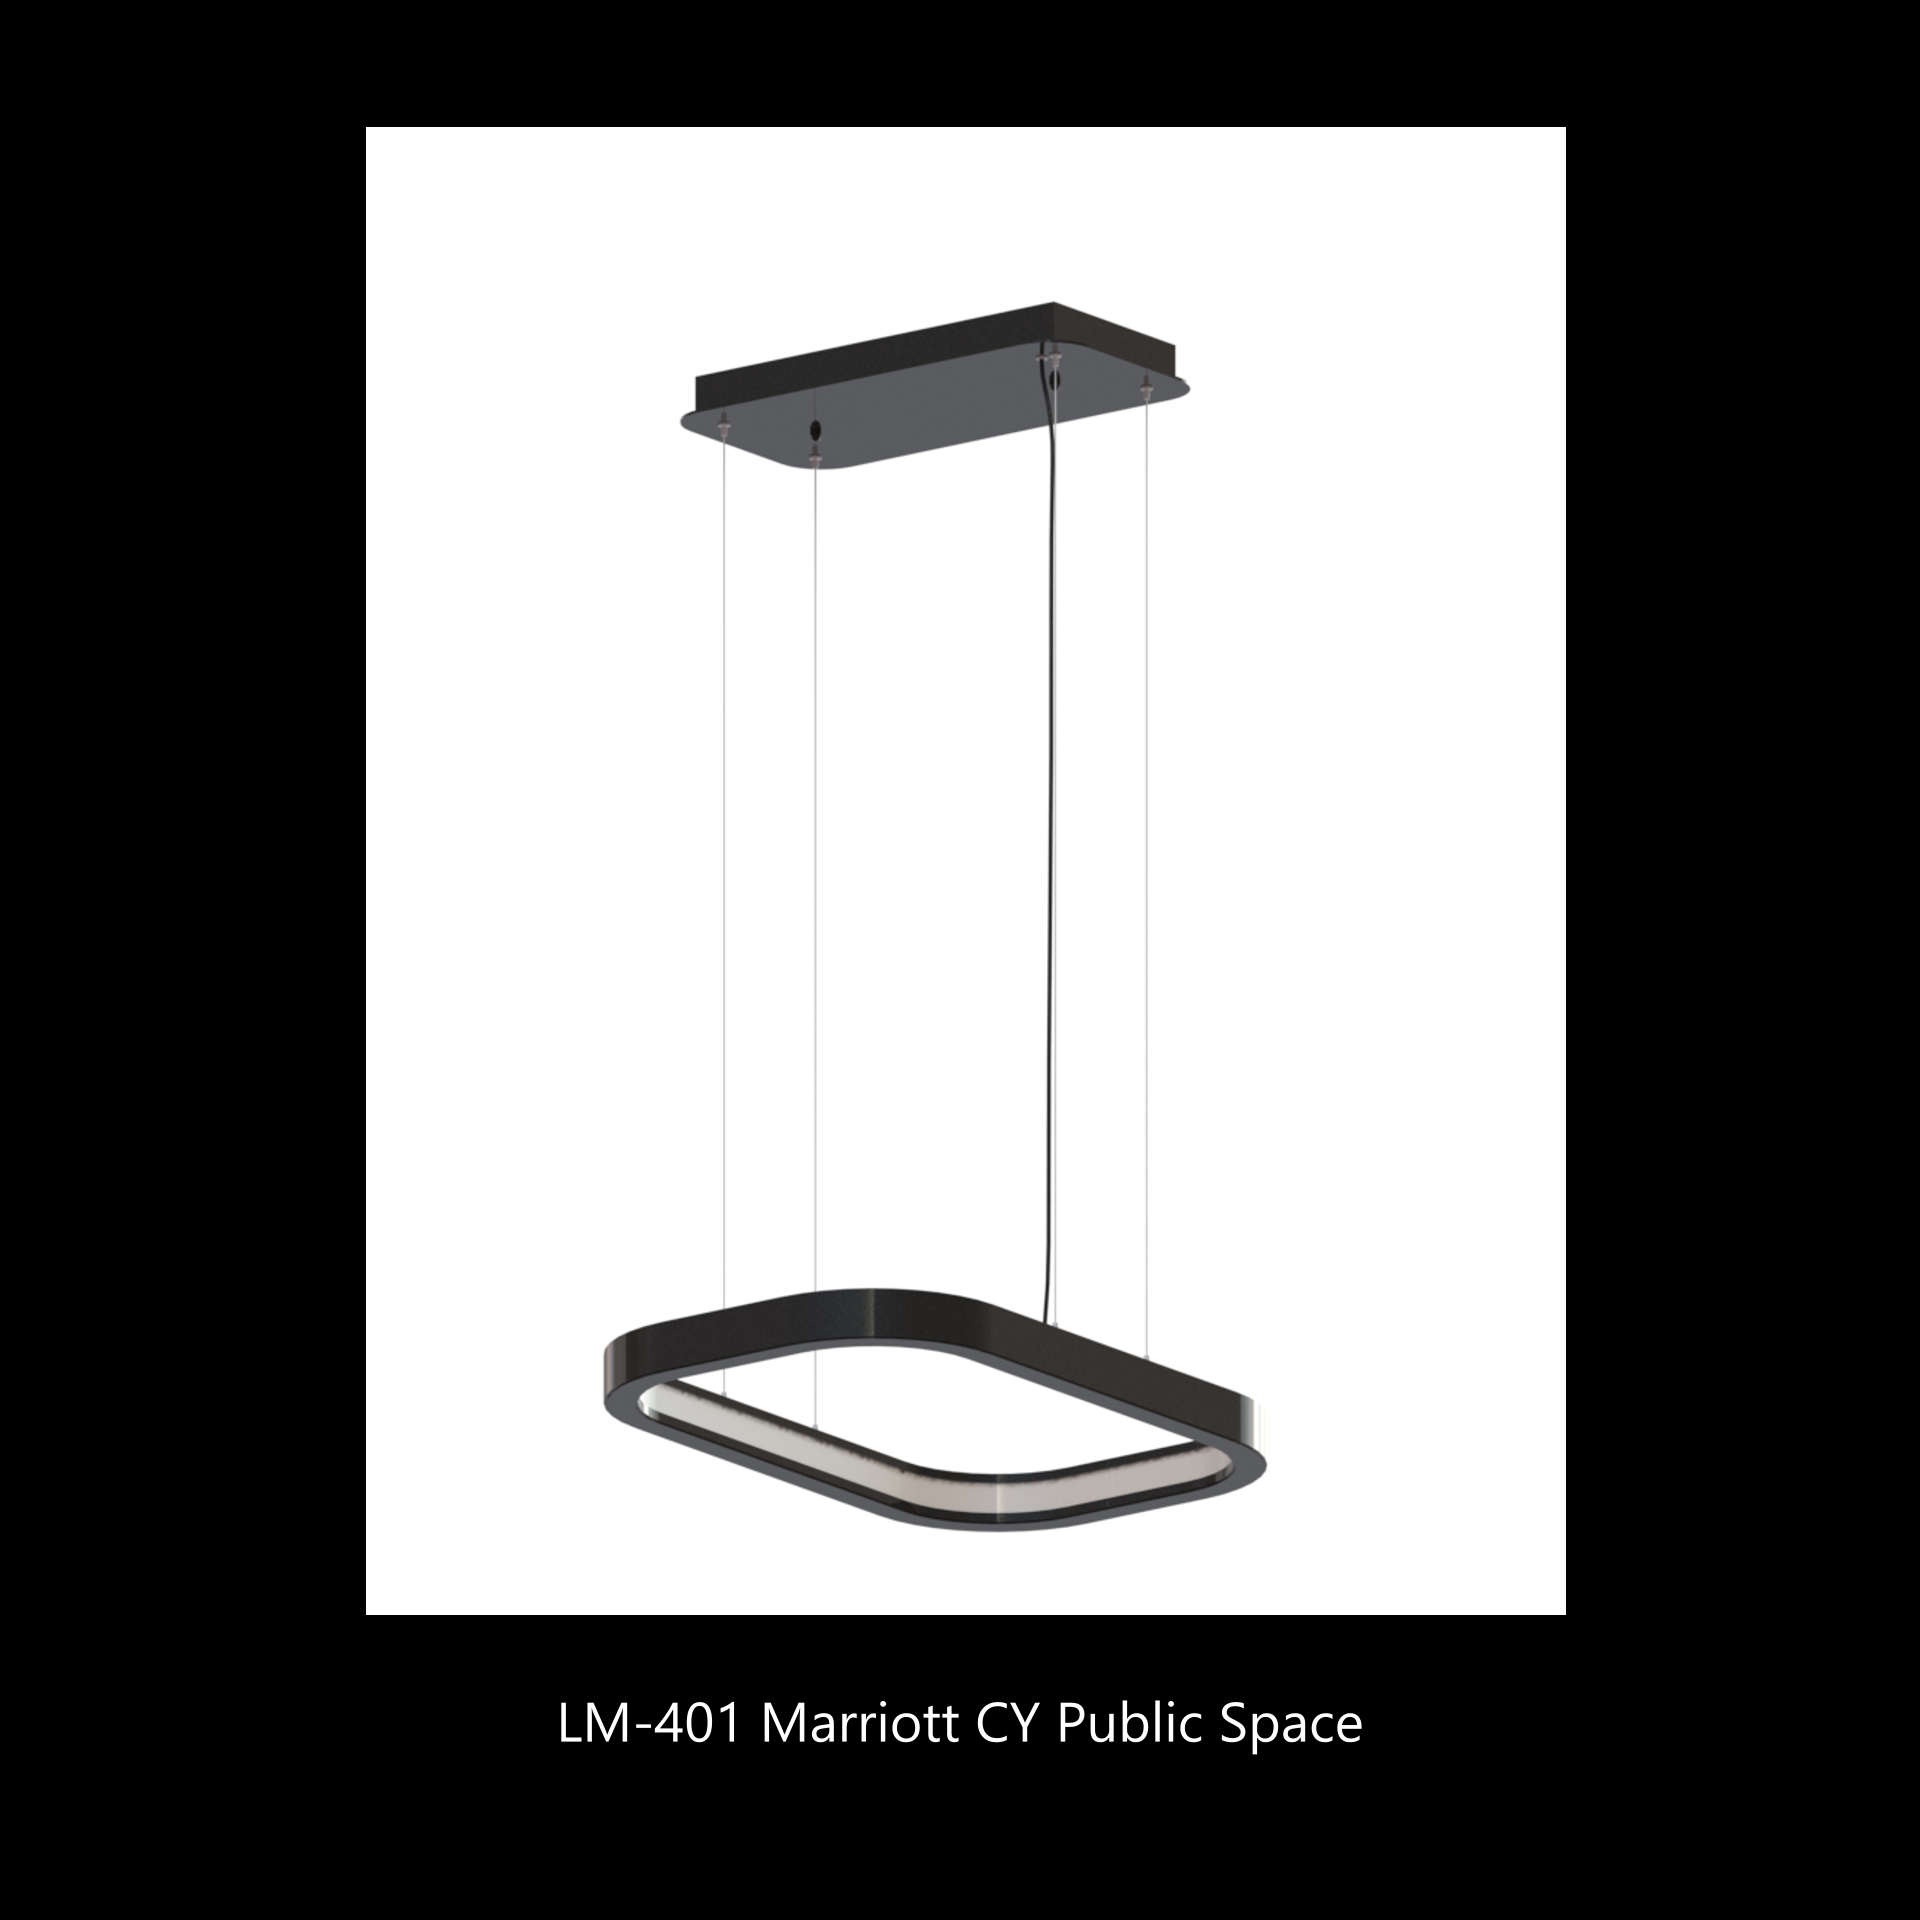 LM-401 Marriott CY Public Space